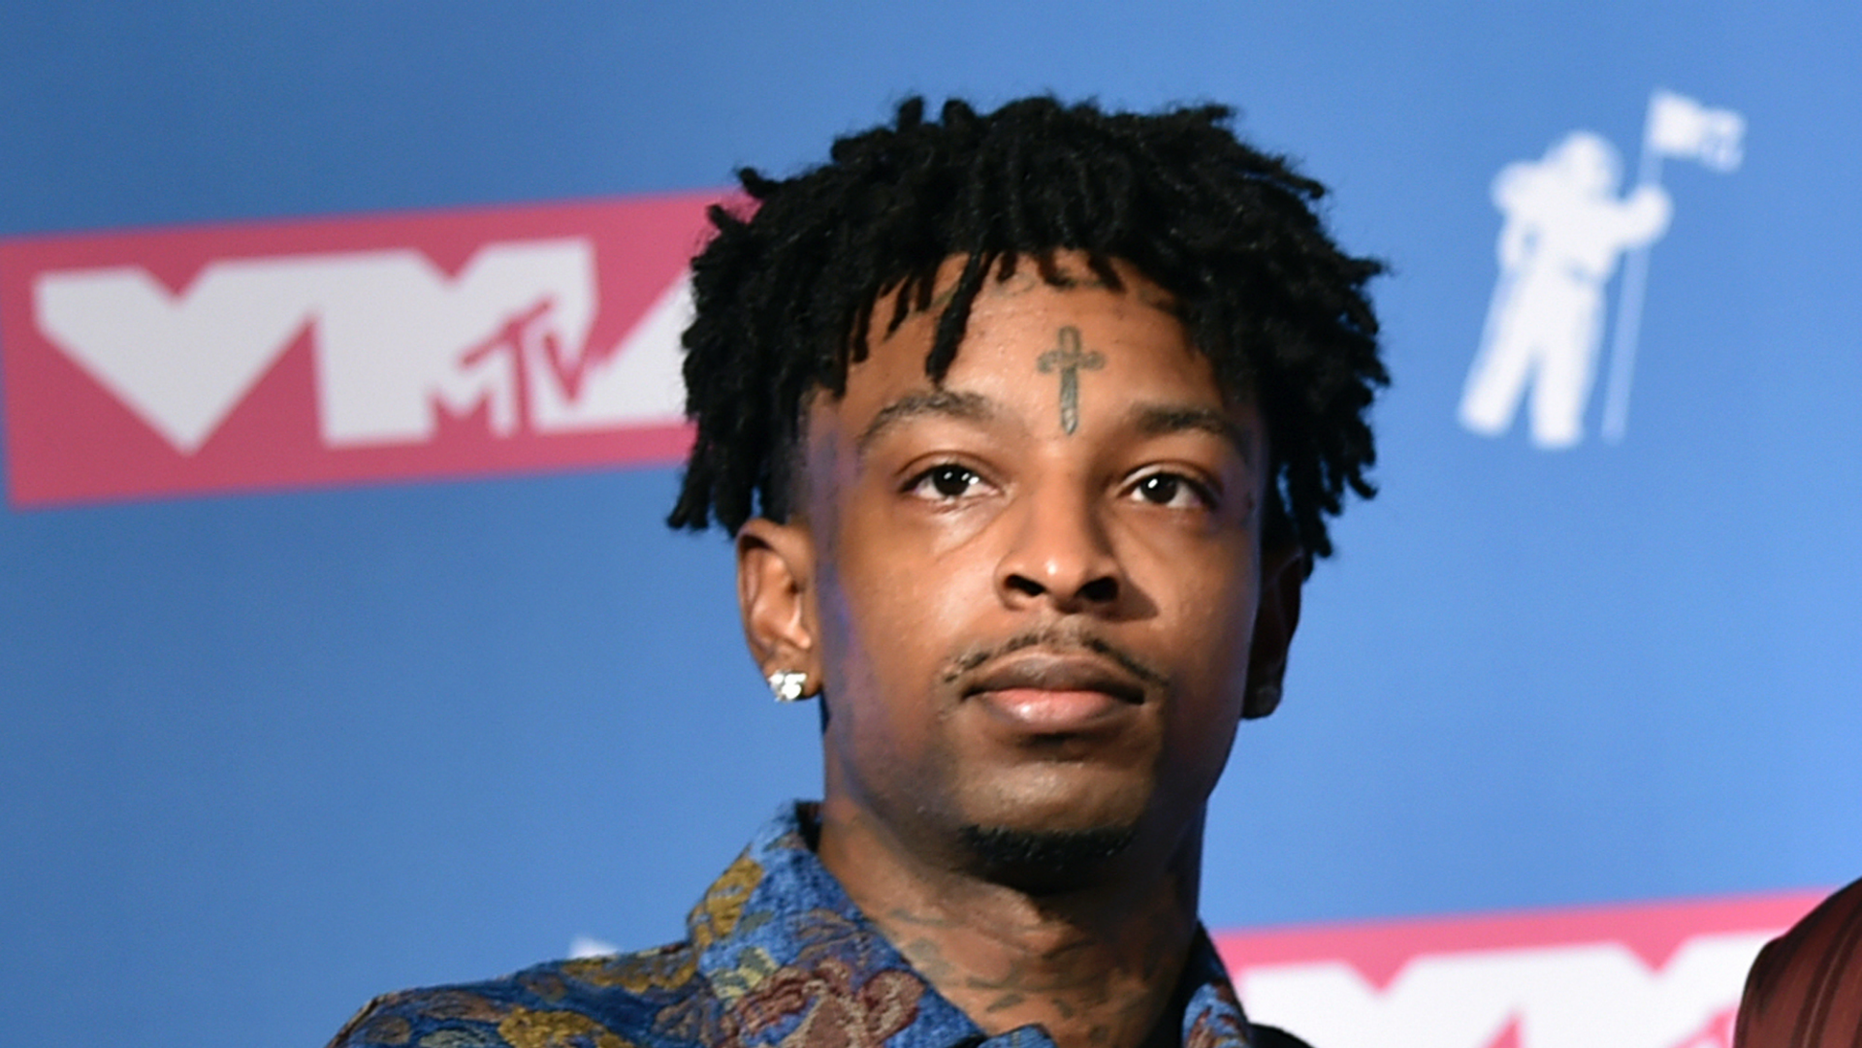 DOSSIER - In this 20 August 2018, archive photo, 21 Savage poses in the press room of the MTV Video Music Awards at Radio City Music Hall in New York. A Savage attorney said Wednesday, Feb. 13, 2019 that the rapper, named by Grammy, She'd Bin Abraham-Joseph, had been released on bail of $ 100,000 from Irwin County Detention Center. in Ocilla, Georgia. (Photo by Evan Agostini / Invision / AP, File)